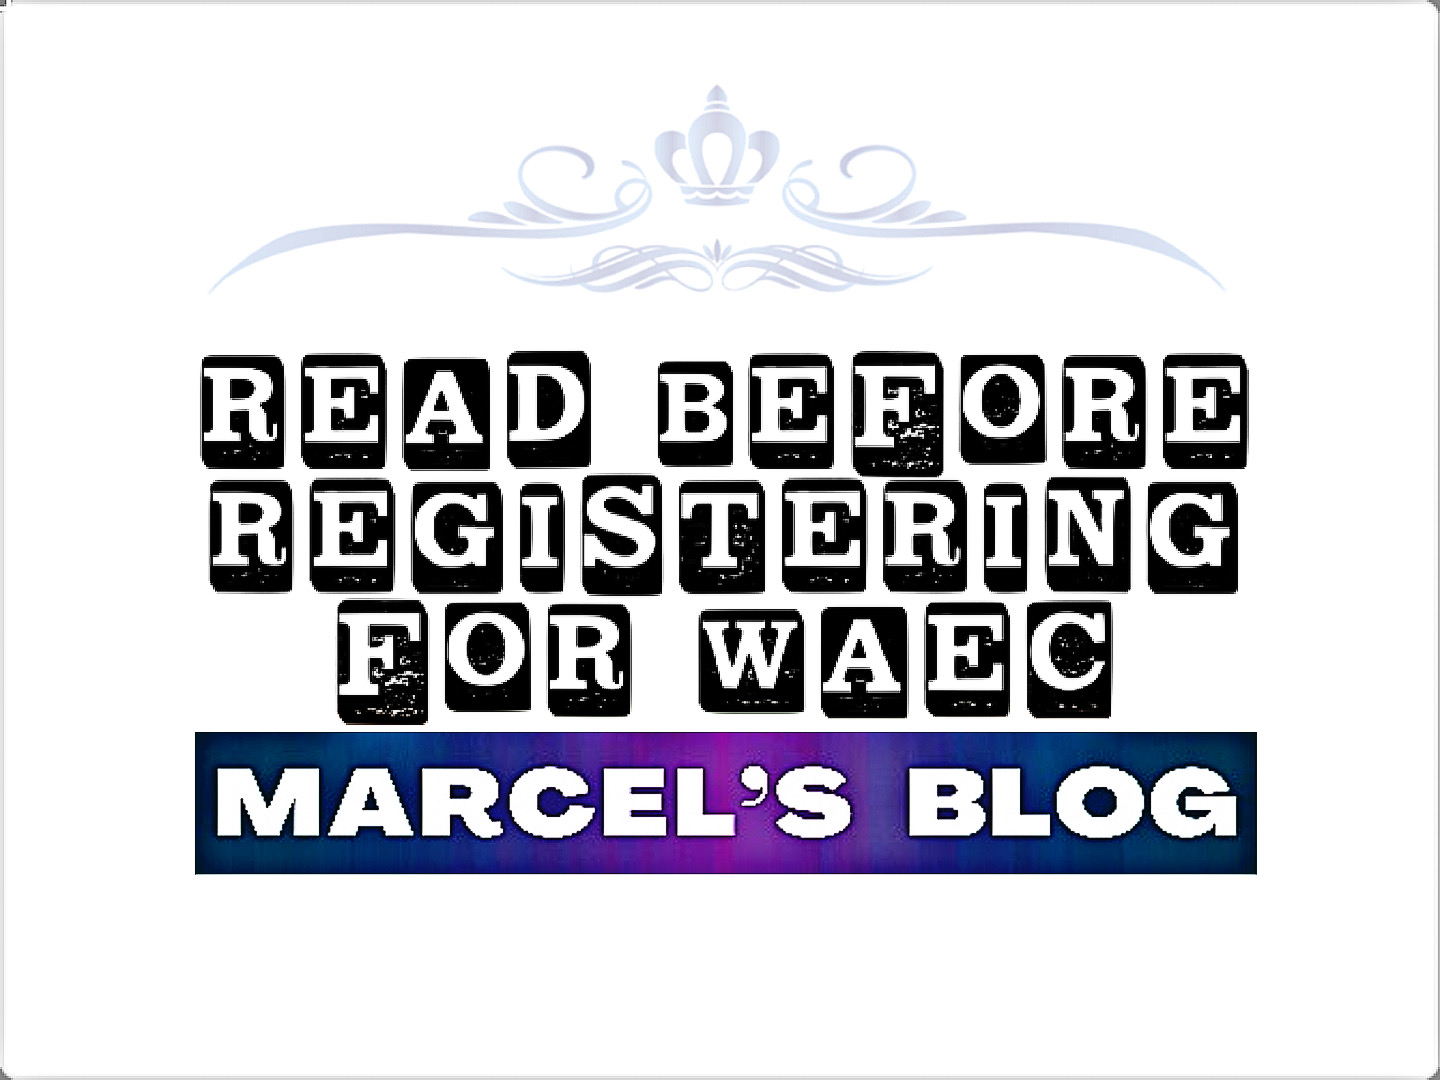 A Must Read Before Registering For WAEC